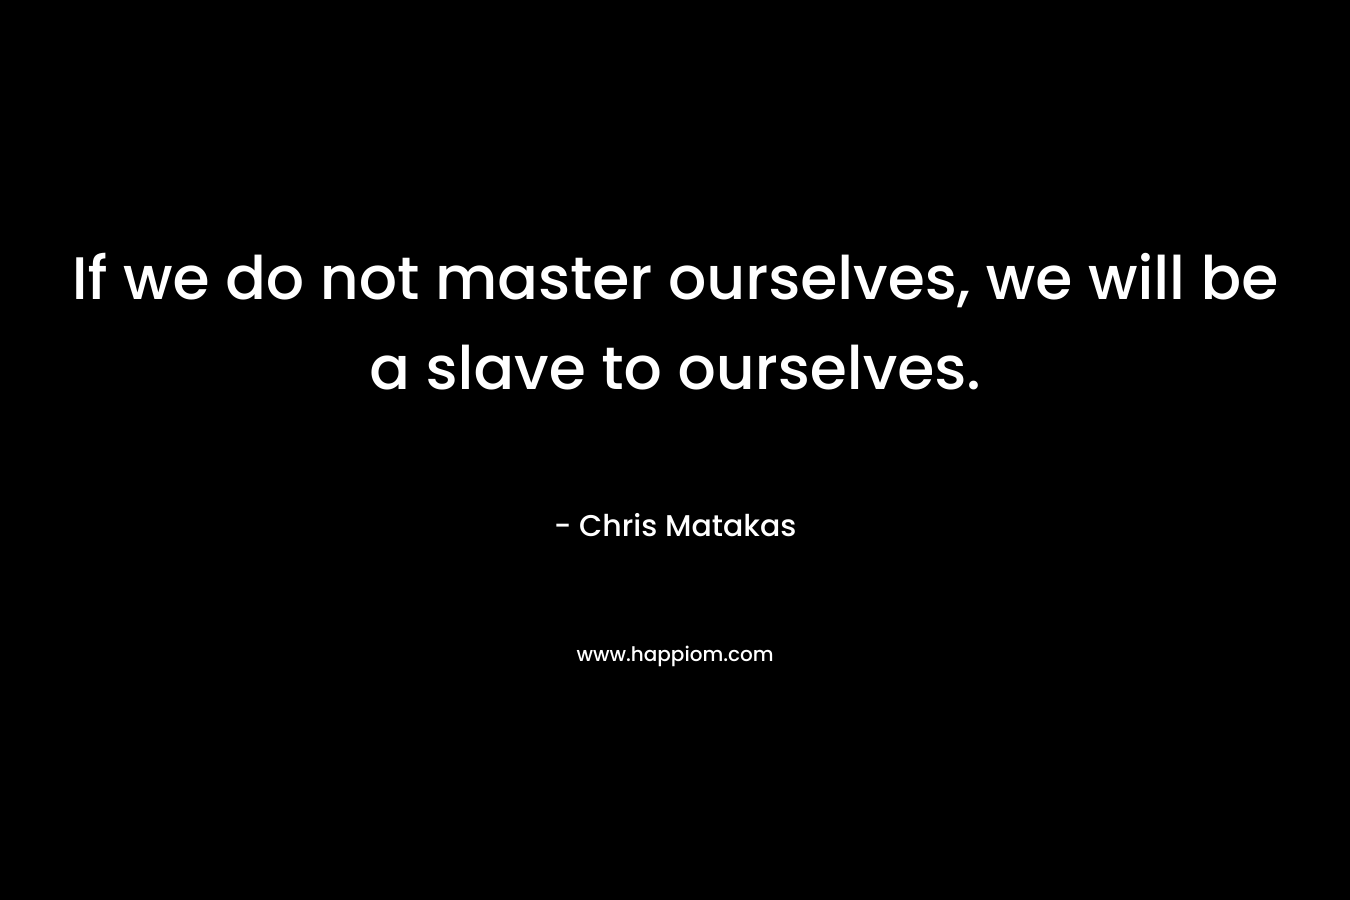 If we do not master ourselves, we will be a slave to ourselves. – Chris Matakas